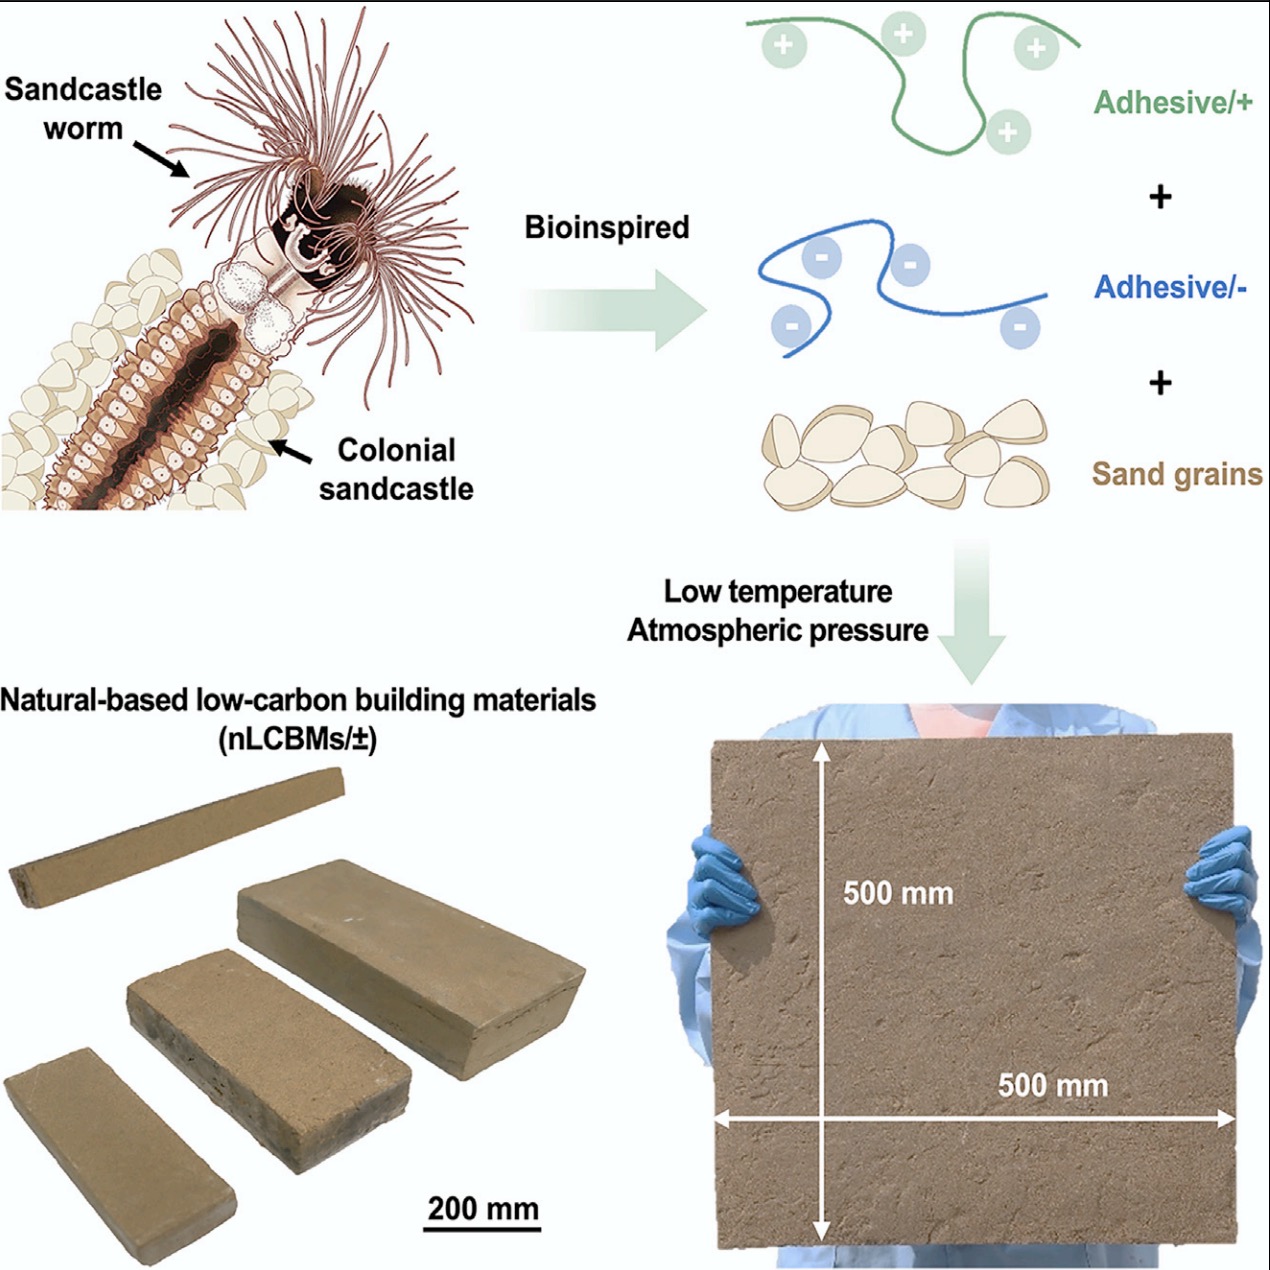 A screenshot of the study published in the journal of Matter showing the design and structure of bio-inspired natural-based low-carbon building materials (nLCBMs/G).